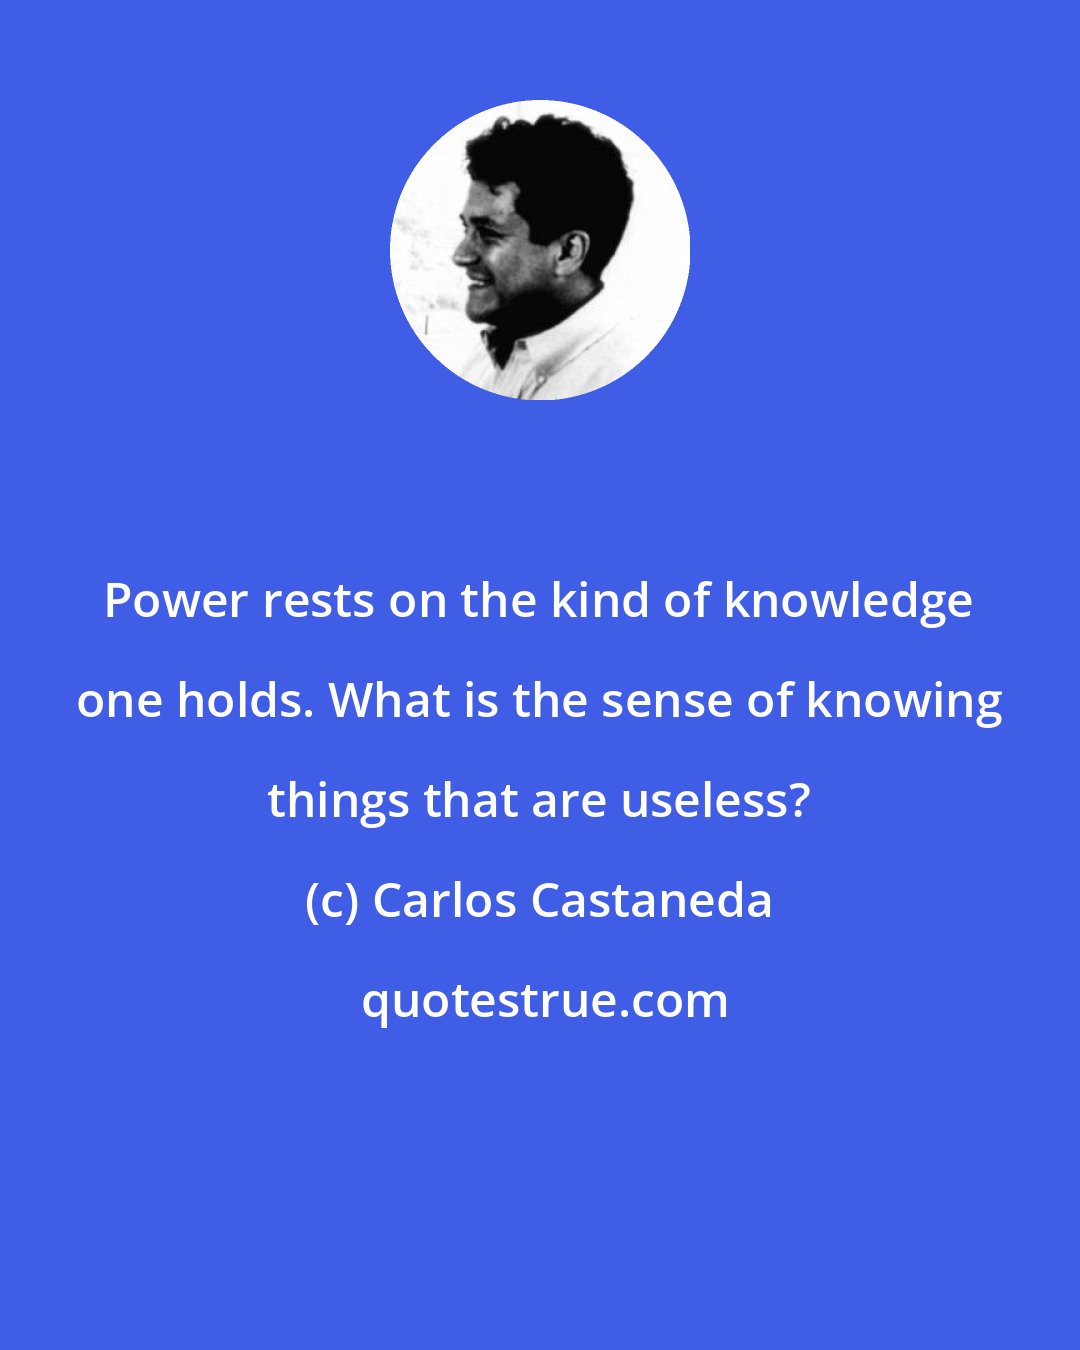 Carlos Castaneda: Power rests on the kind of knowledge one holds. What is the sense of knowing things that are useless?